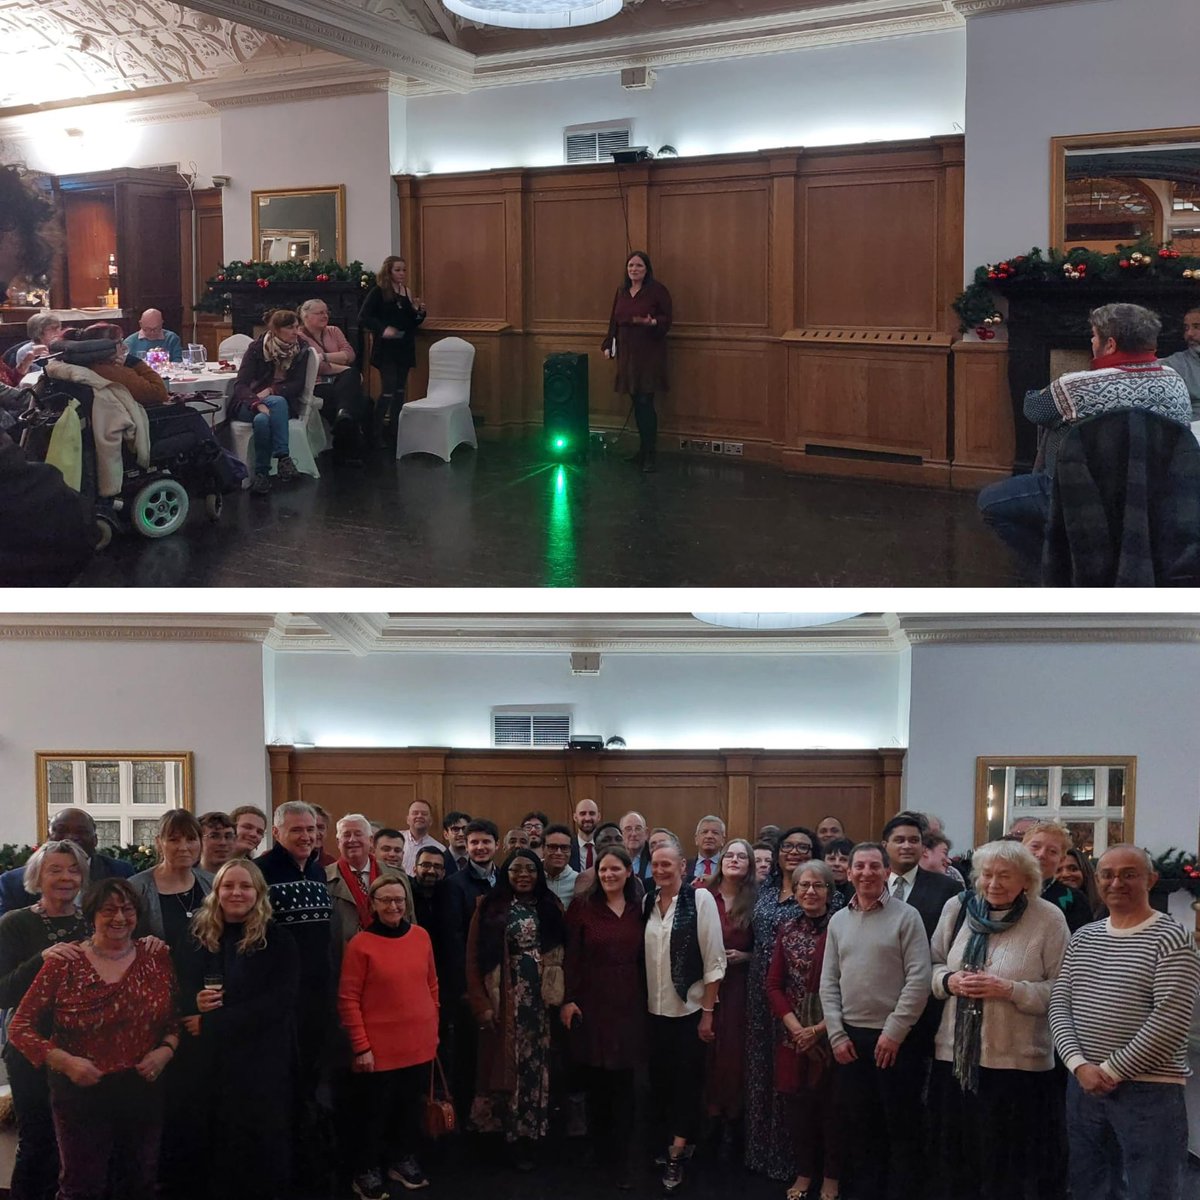 A packed evening with a room full with wonderful @UKLabour family for the re-elect @anne_clarke Barnet & Camden GLA campaign launch, everyone is ready, energised and looking forward to be at doorsteps! @CamdenLabour @HampsteadLabour @labour_branchWH